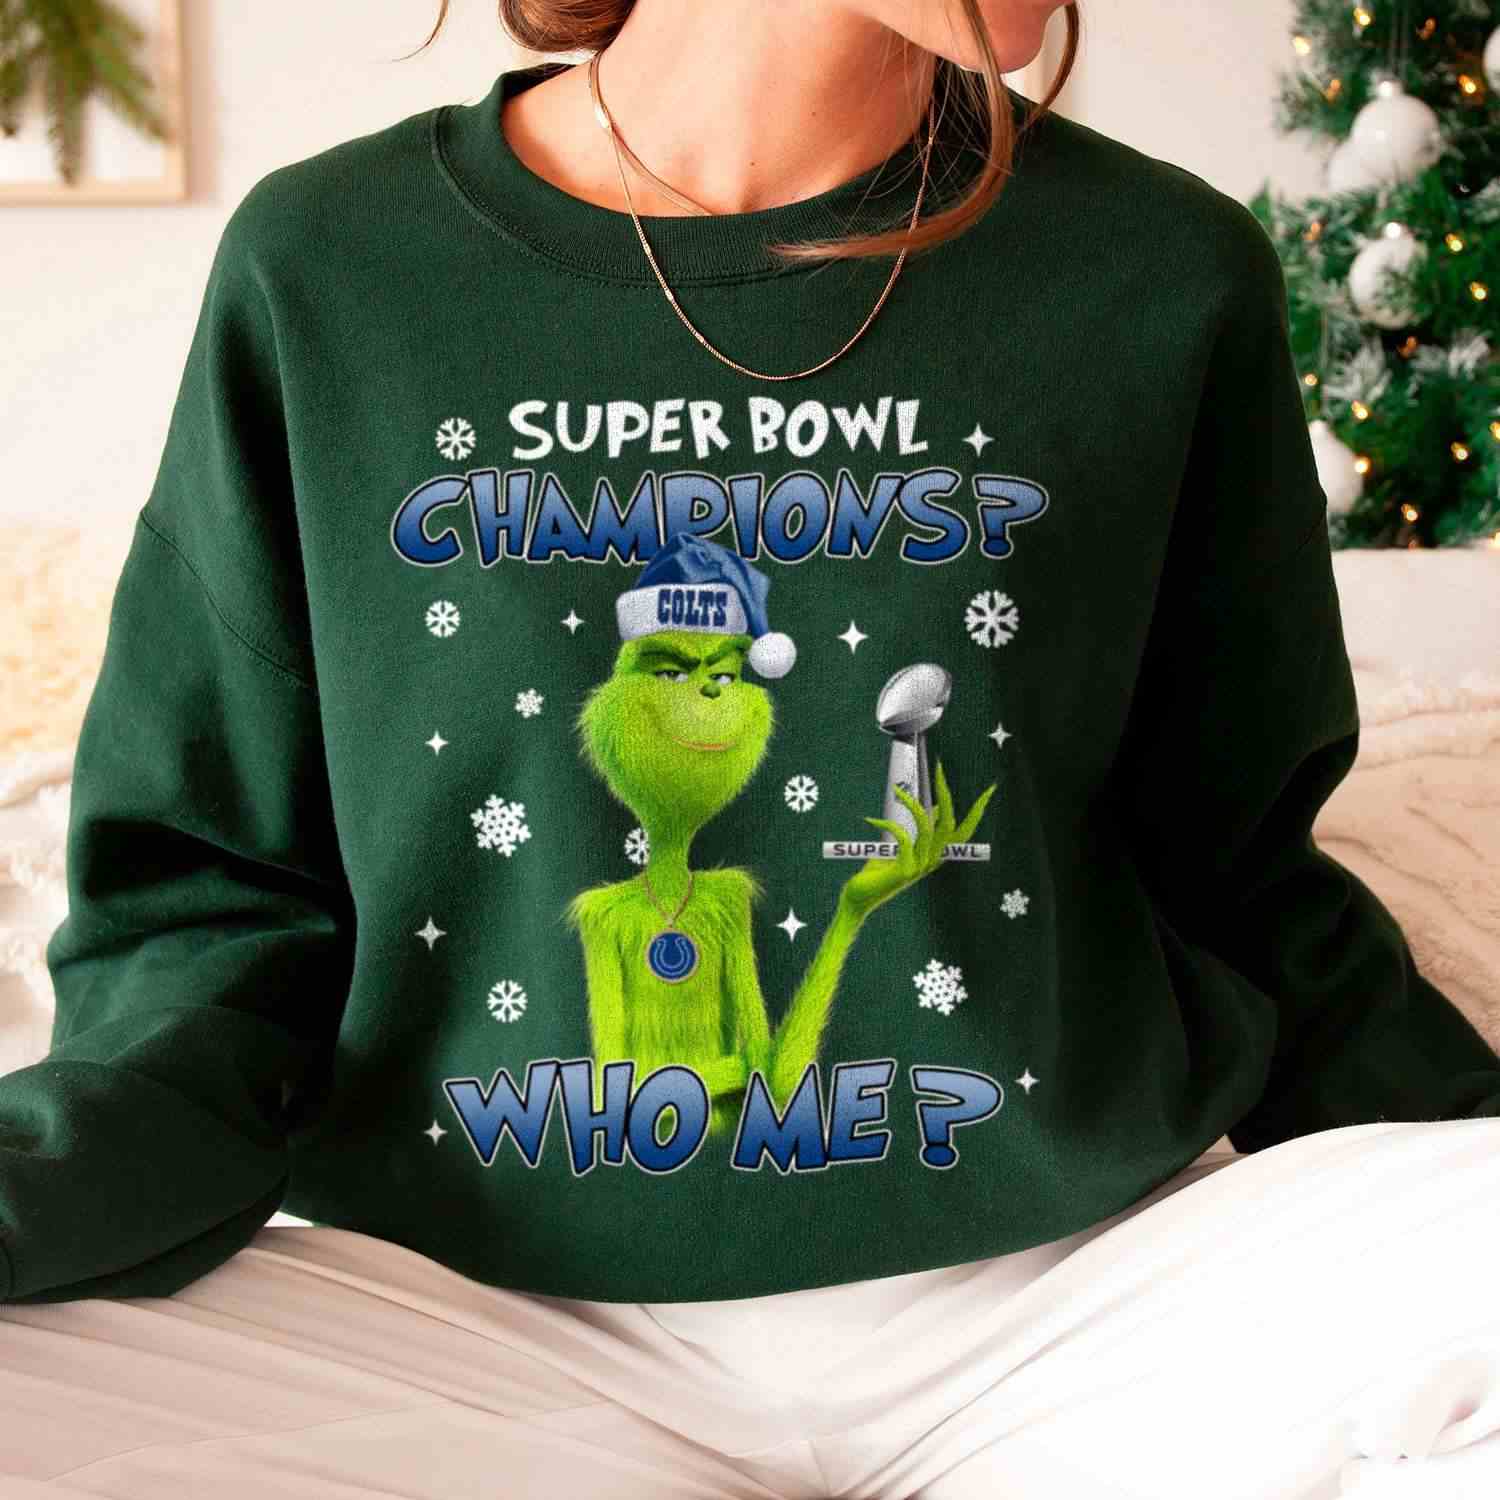 Grinch Who Me Super Bowl Champions Indianapolis Colts T-Shirt